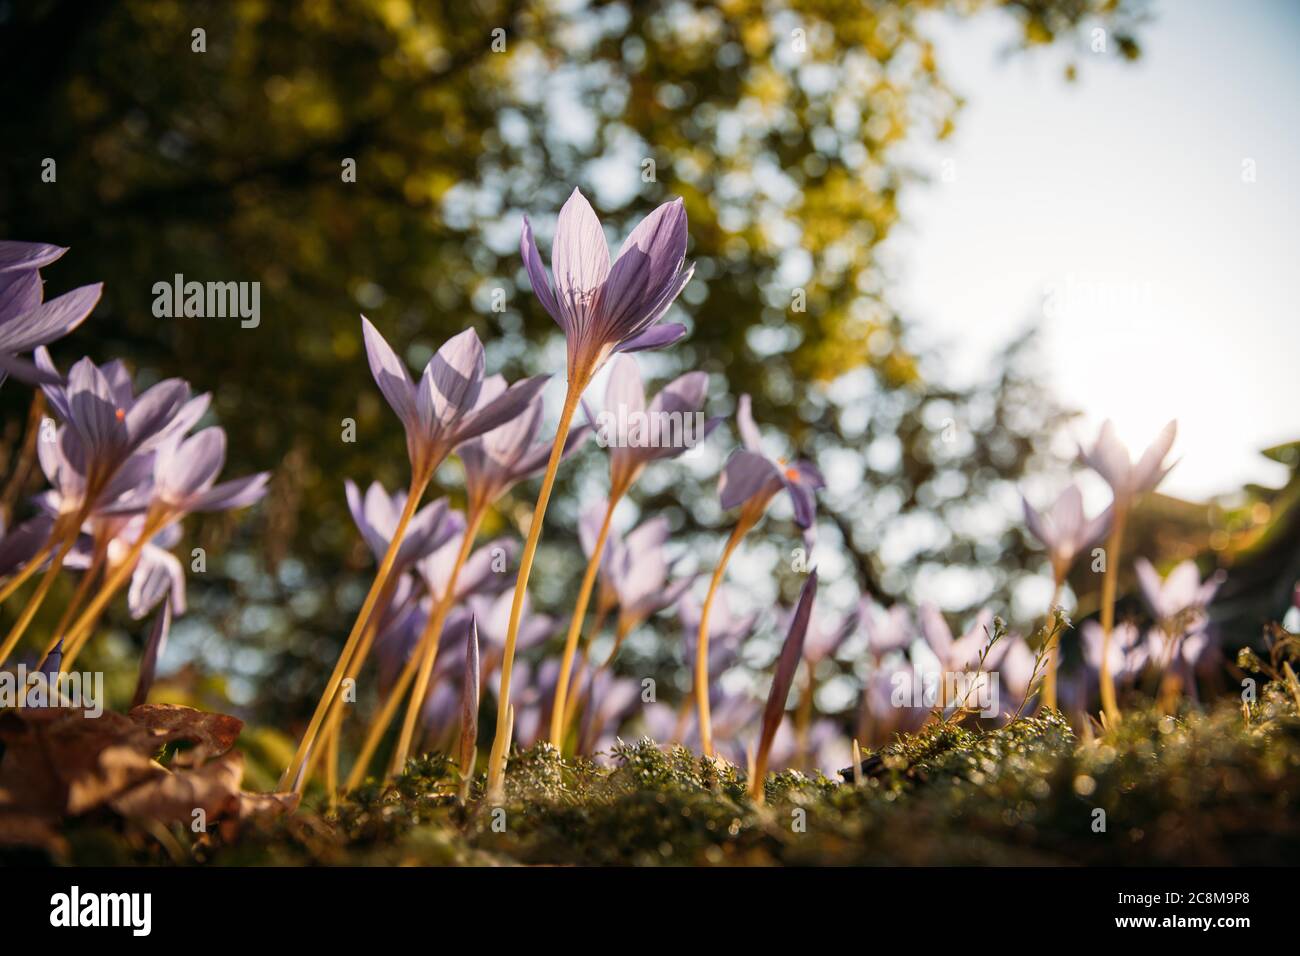 Gardening, planting concept. Сlose up of Colchicum autumnale/ Crocus - autumn flower on the field, tree on blurred background, bottom view. Stock Photo